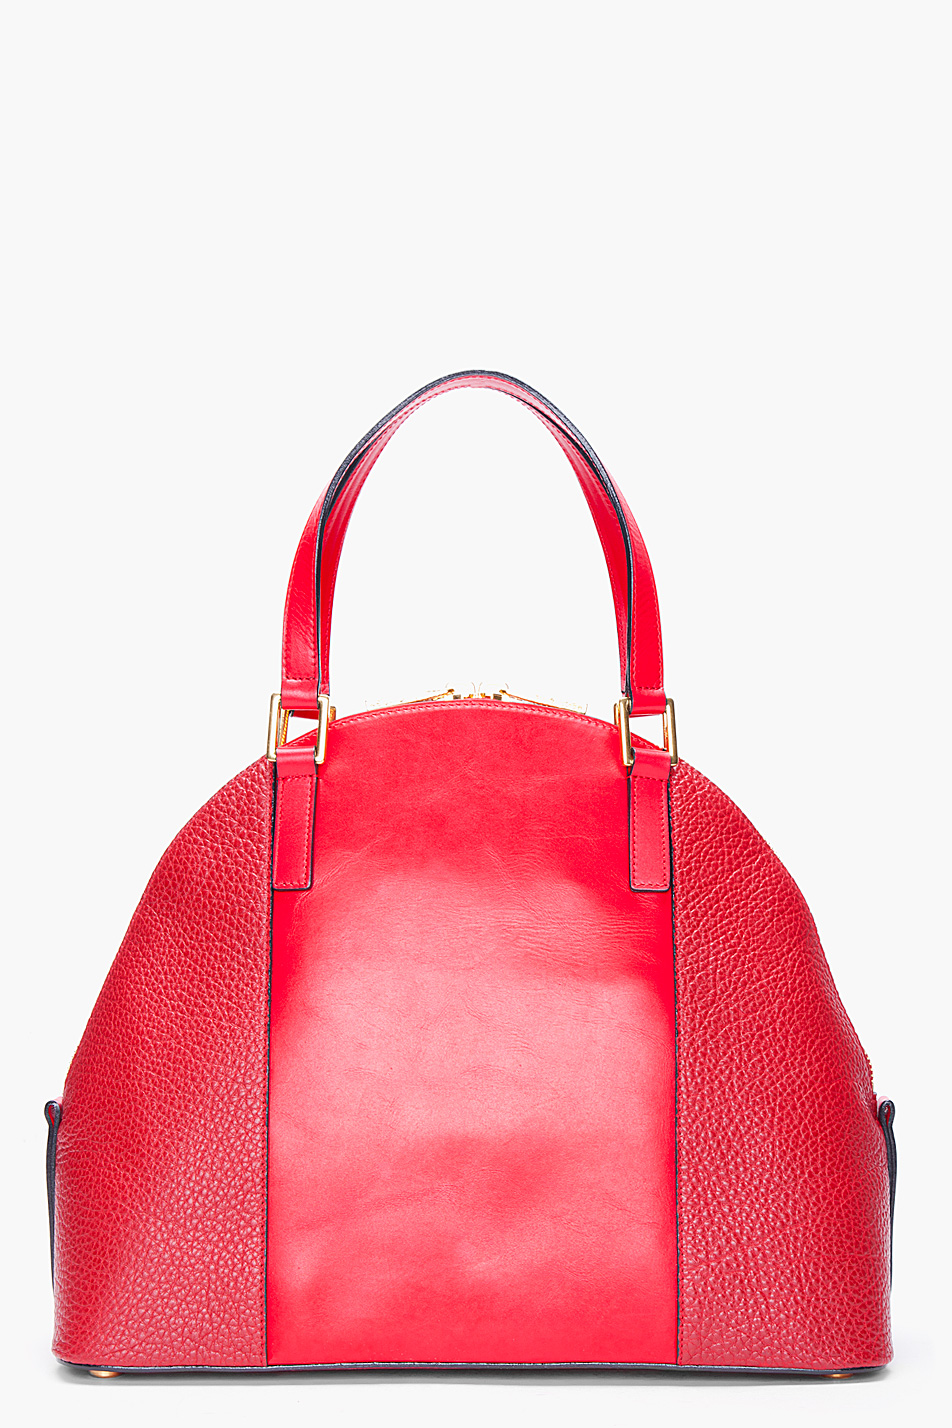 Lyst - Marc Jacobs Maroon Crosby Classic Tote in Red